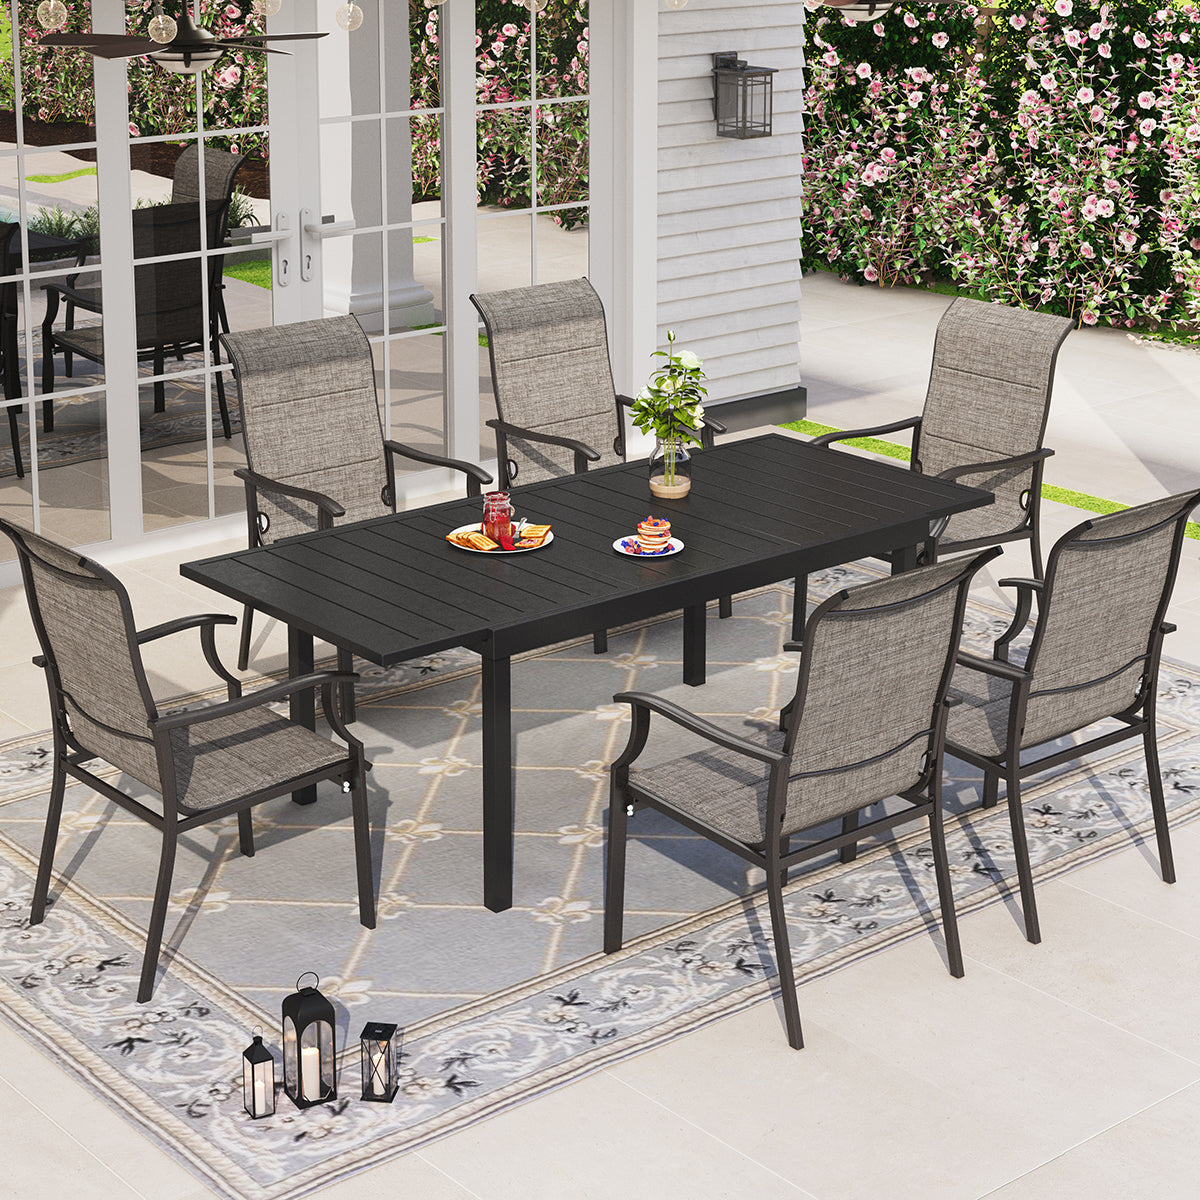 PHI VILLA Expandable Table Patio Dining Set with Highback Textilene Fixed Dining Chairs